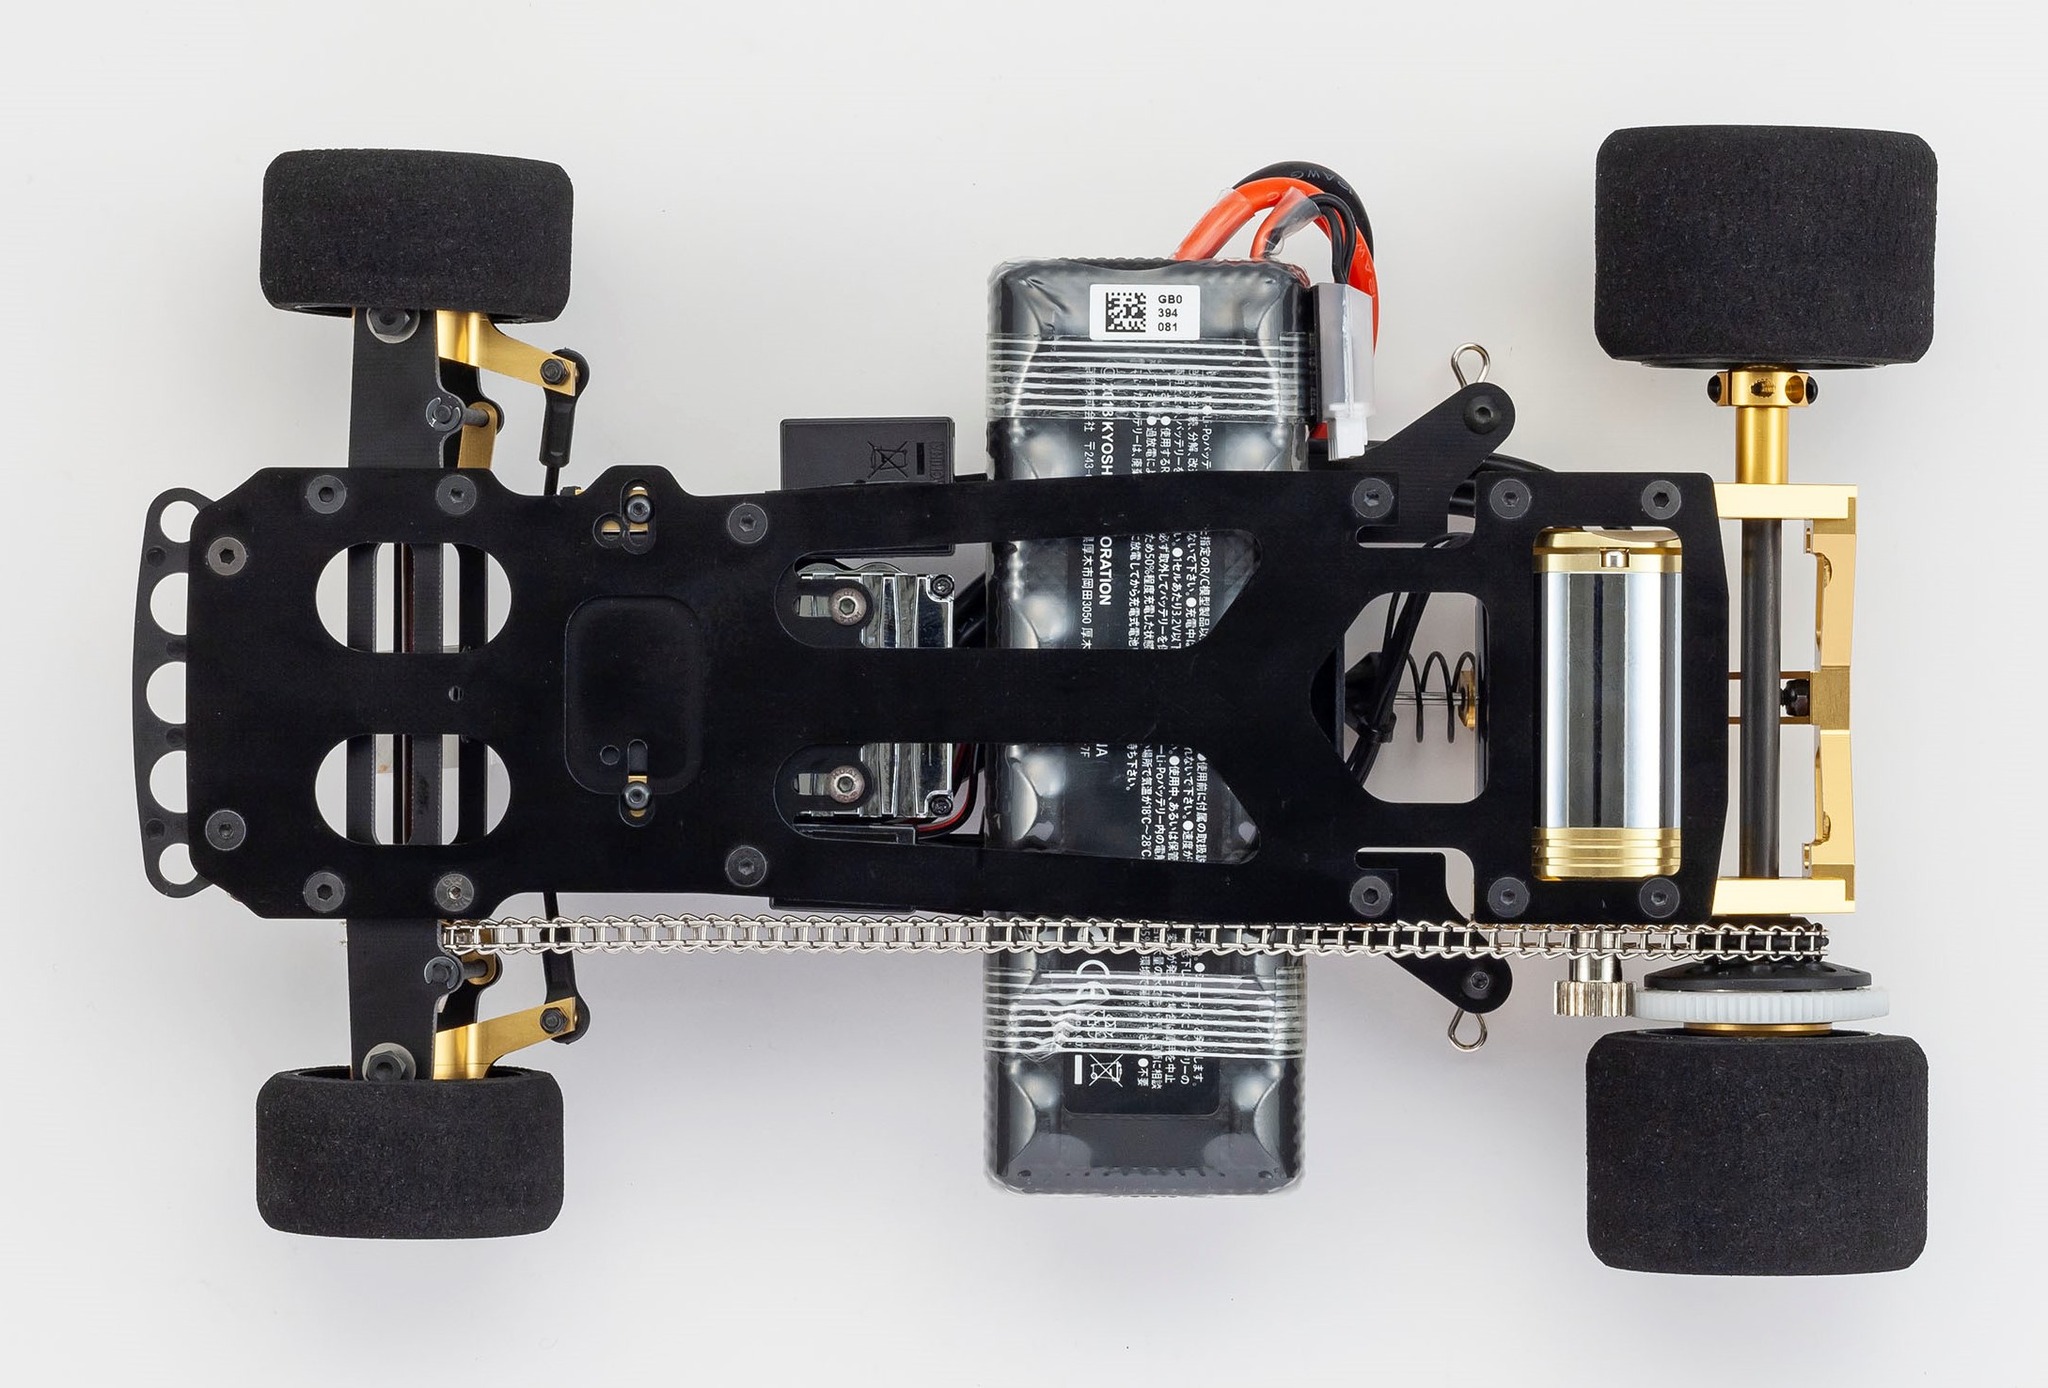 Kyosho Fantom EP 4WD Ext Gold 60th Anniversary Edition